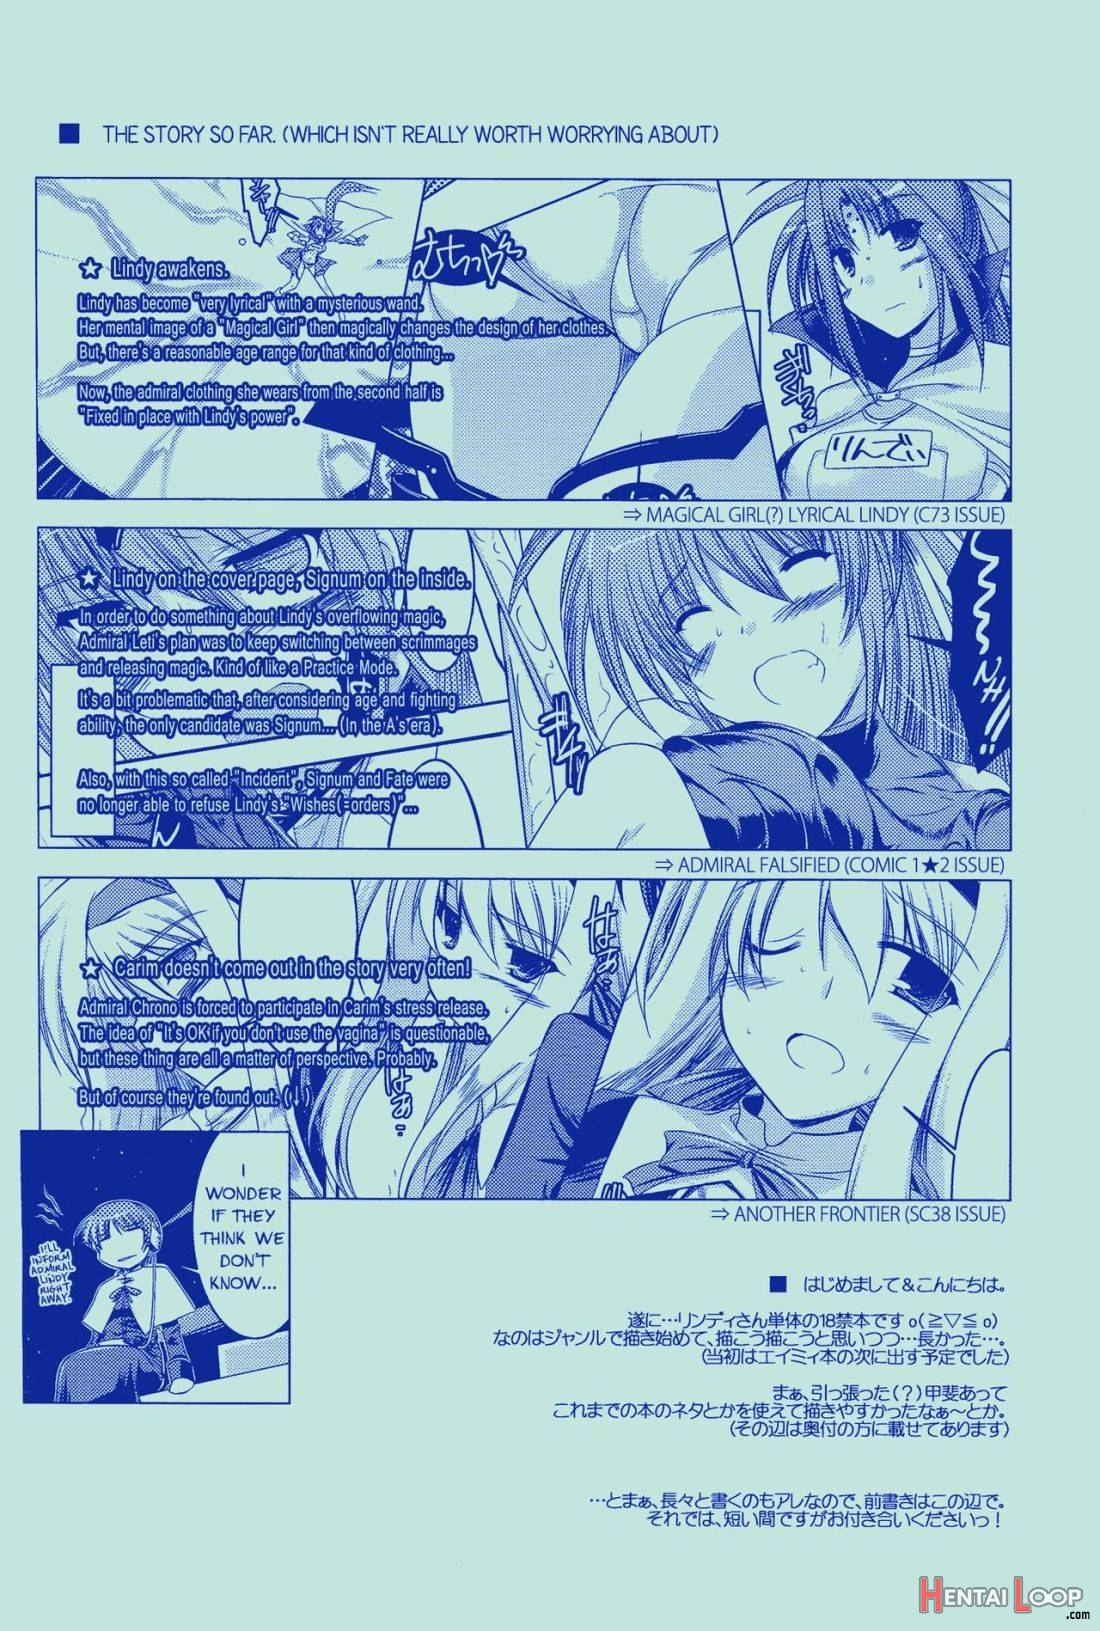 ANOTHER FRONTIER 02 Magical Girl Lyrical Lindy-san #03 page 2